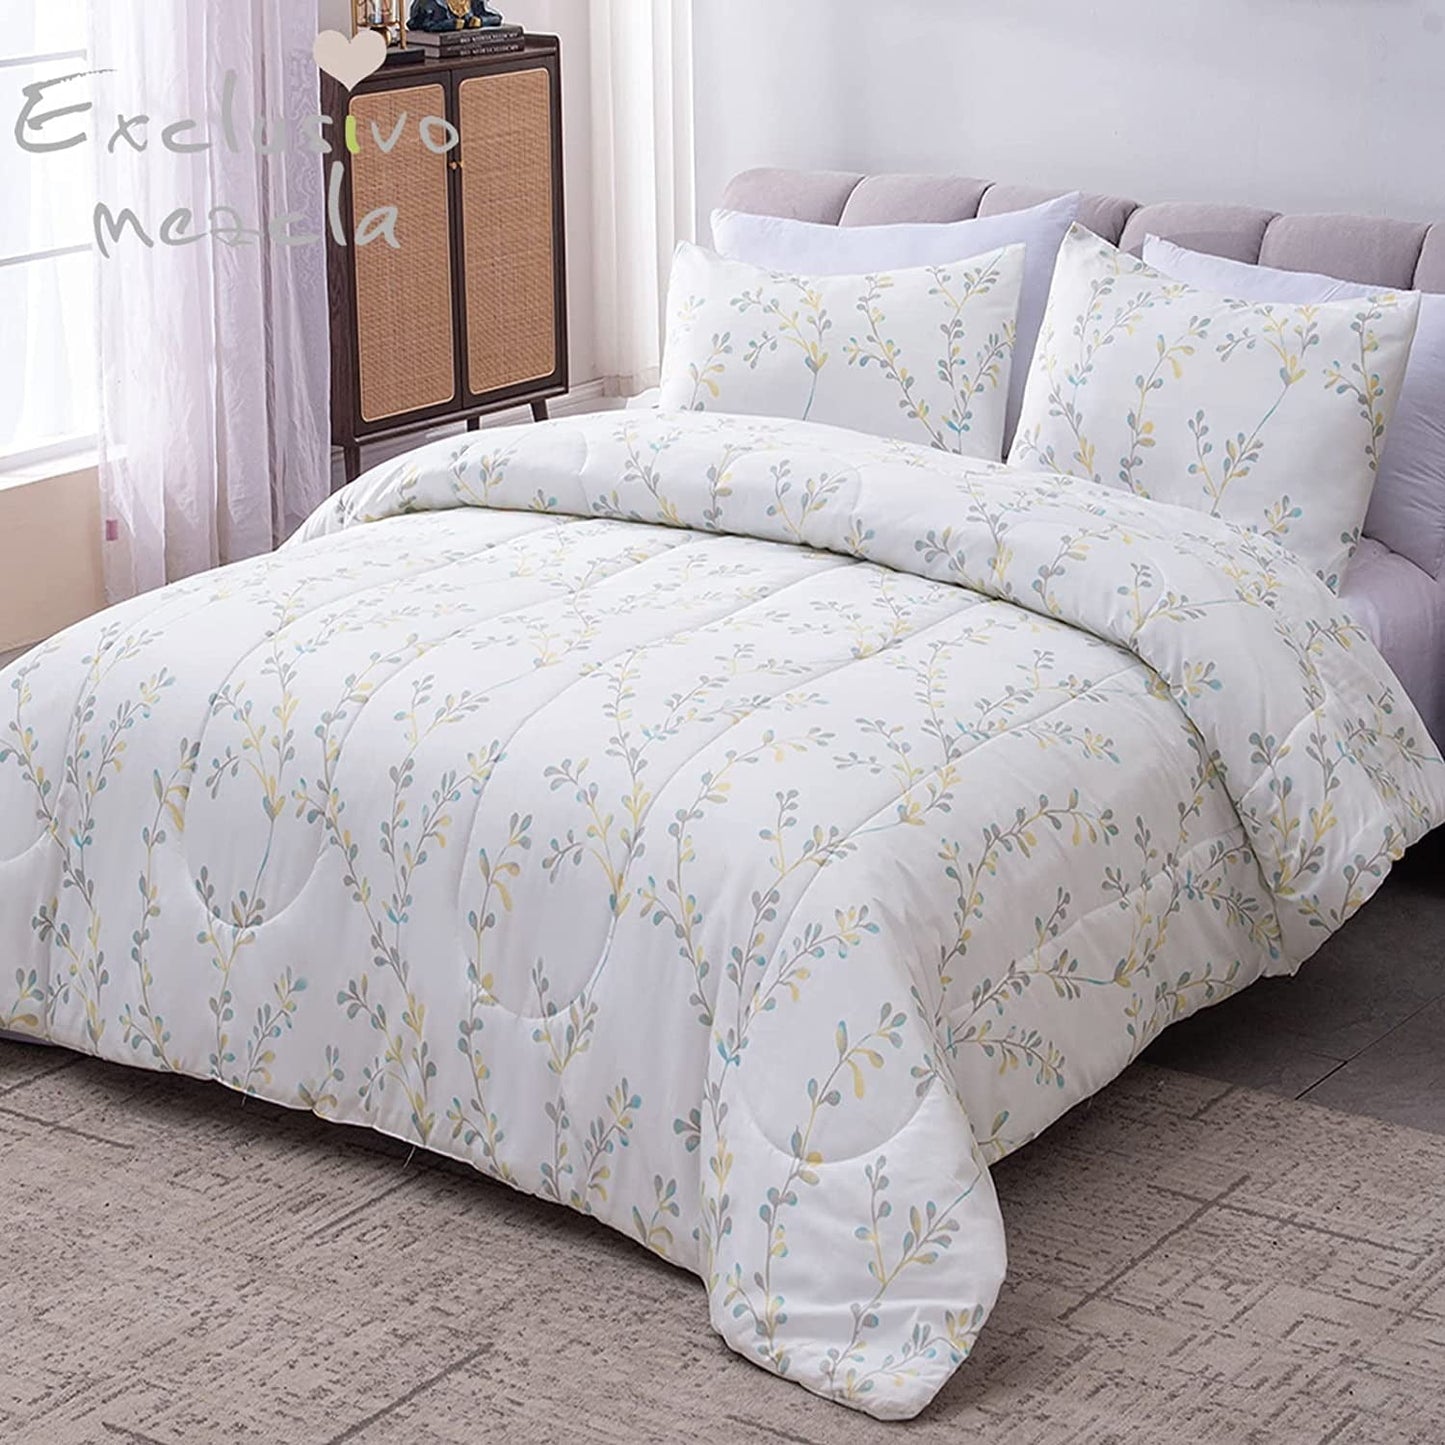 Exclusivo Mezcla 2-Piece Floral Twin Comforter Set, Microfiber Bedding Down Alternative Comforter for All Seasons with 1 Pillow Sham, White